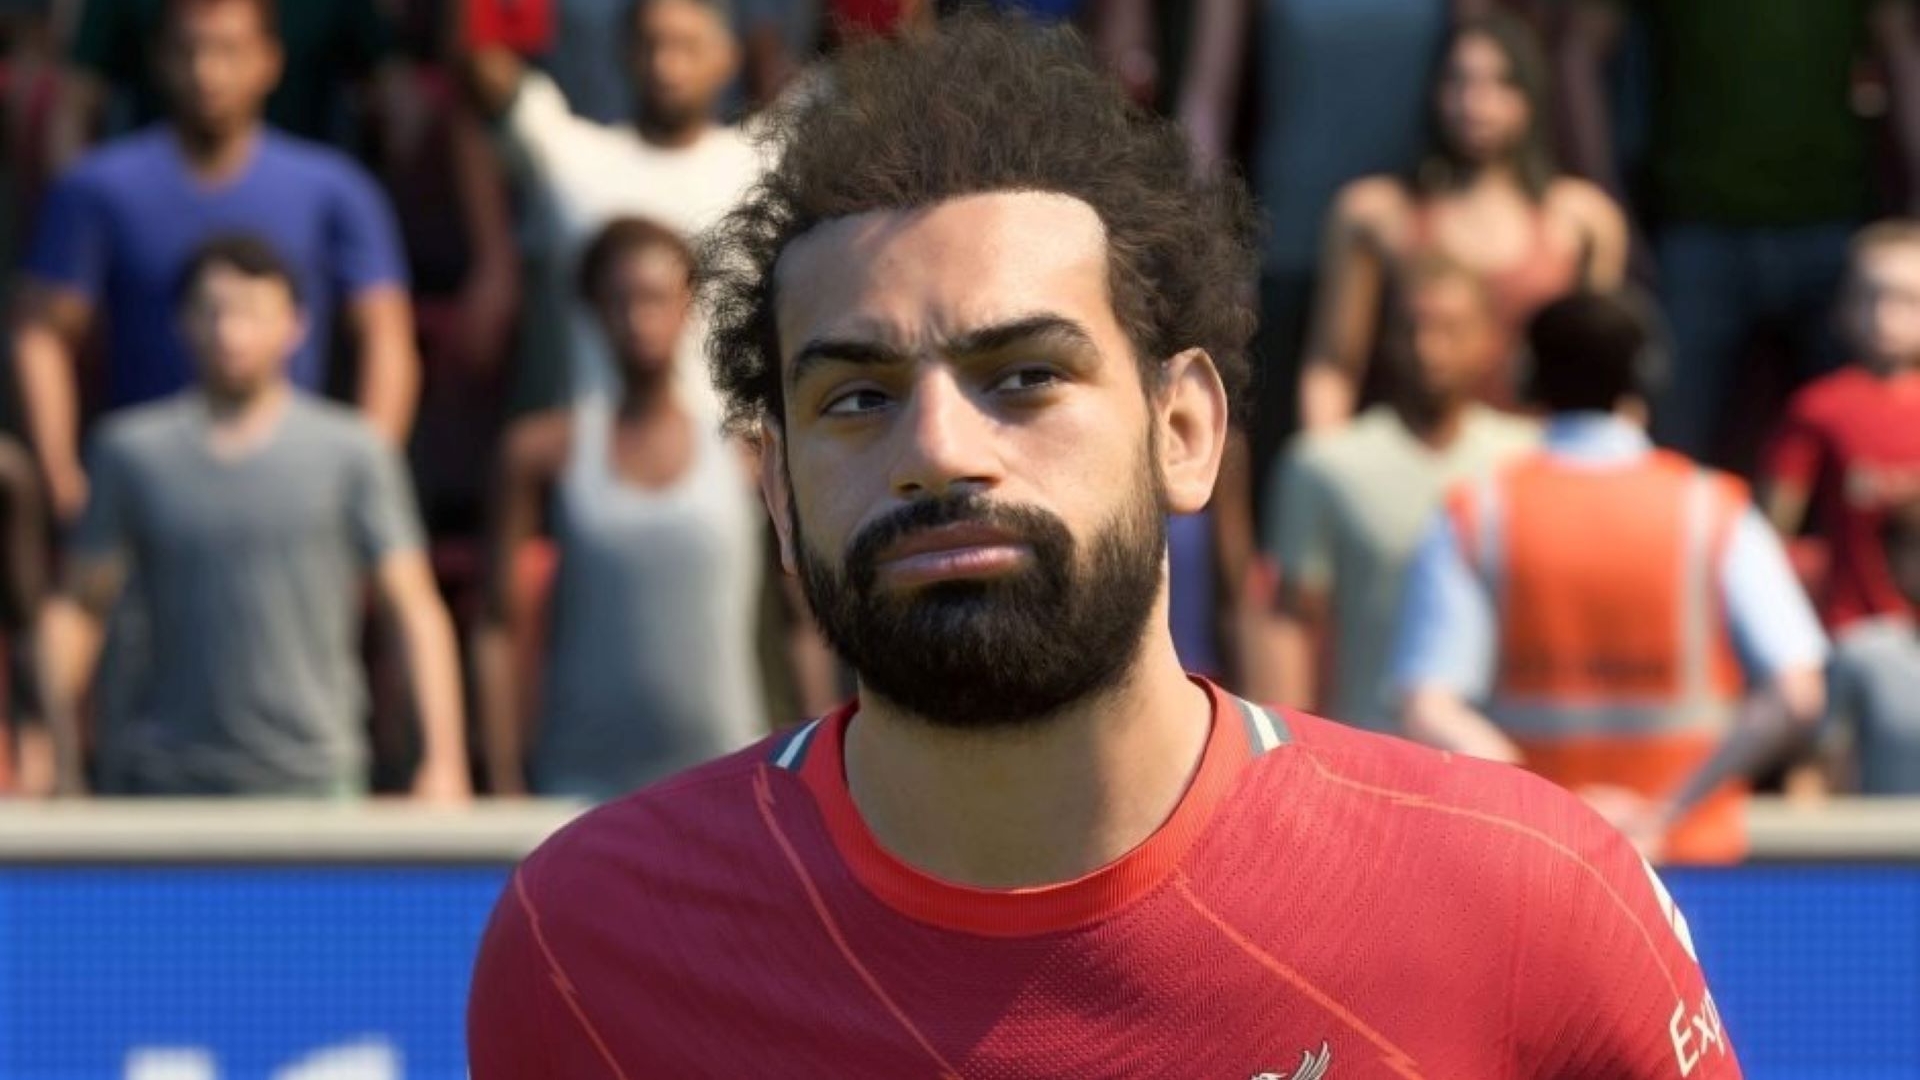 Prime Gaming gives away Mo Salah and more in FIFA 23 promotion